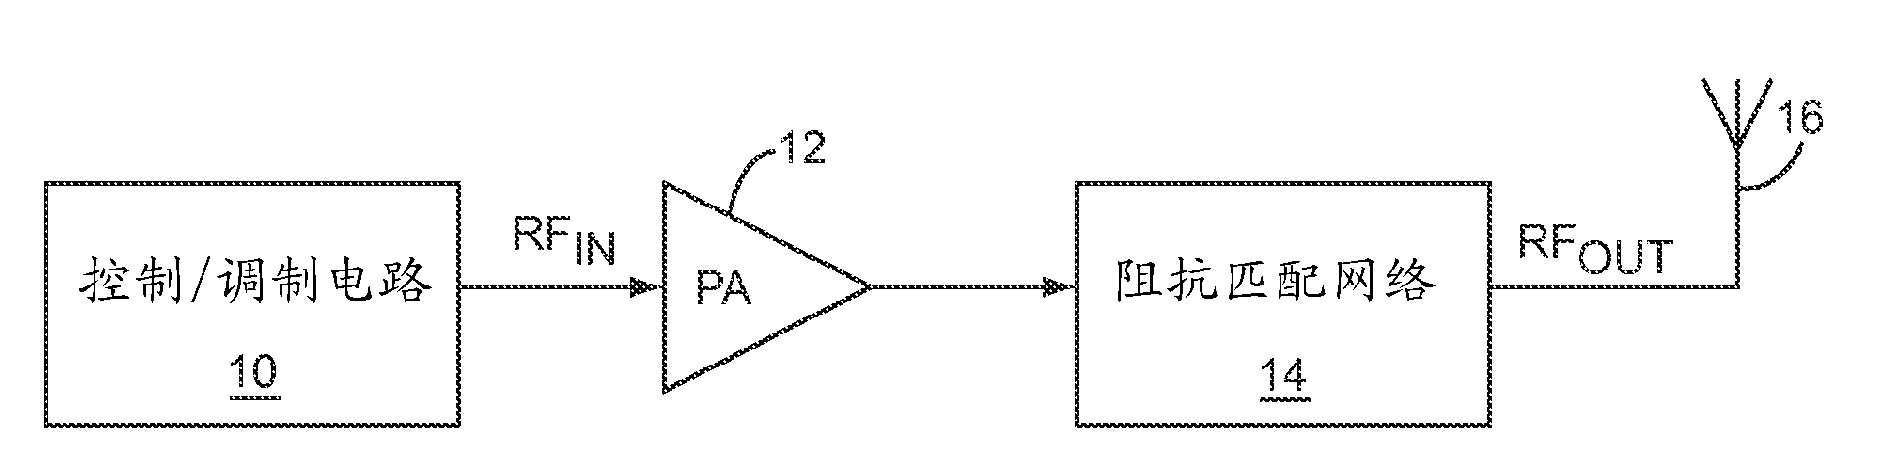 Matching network for transmission circuitry